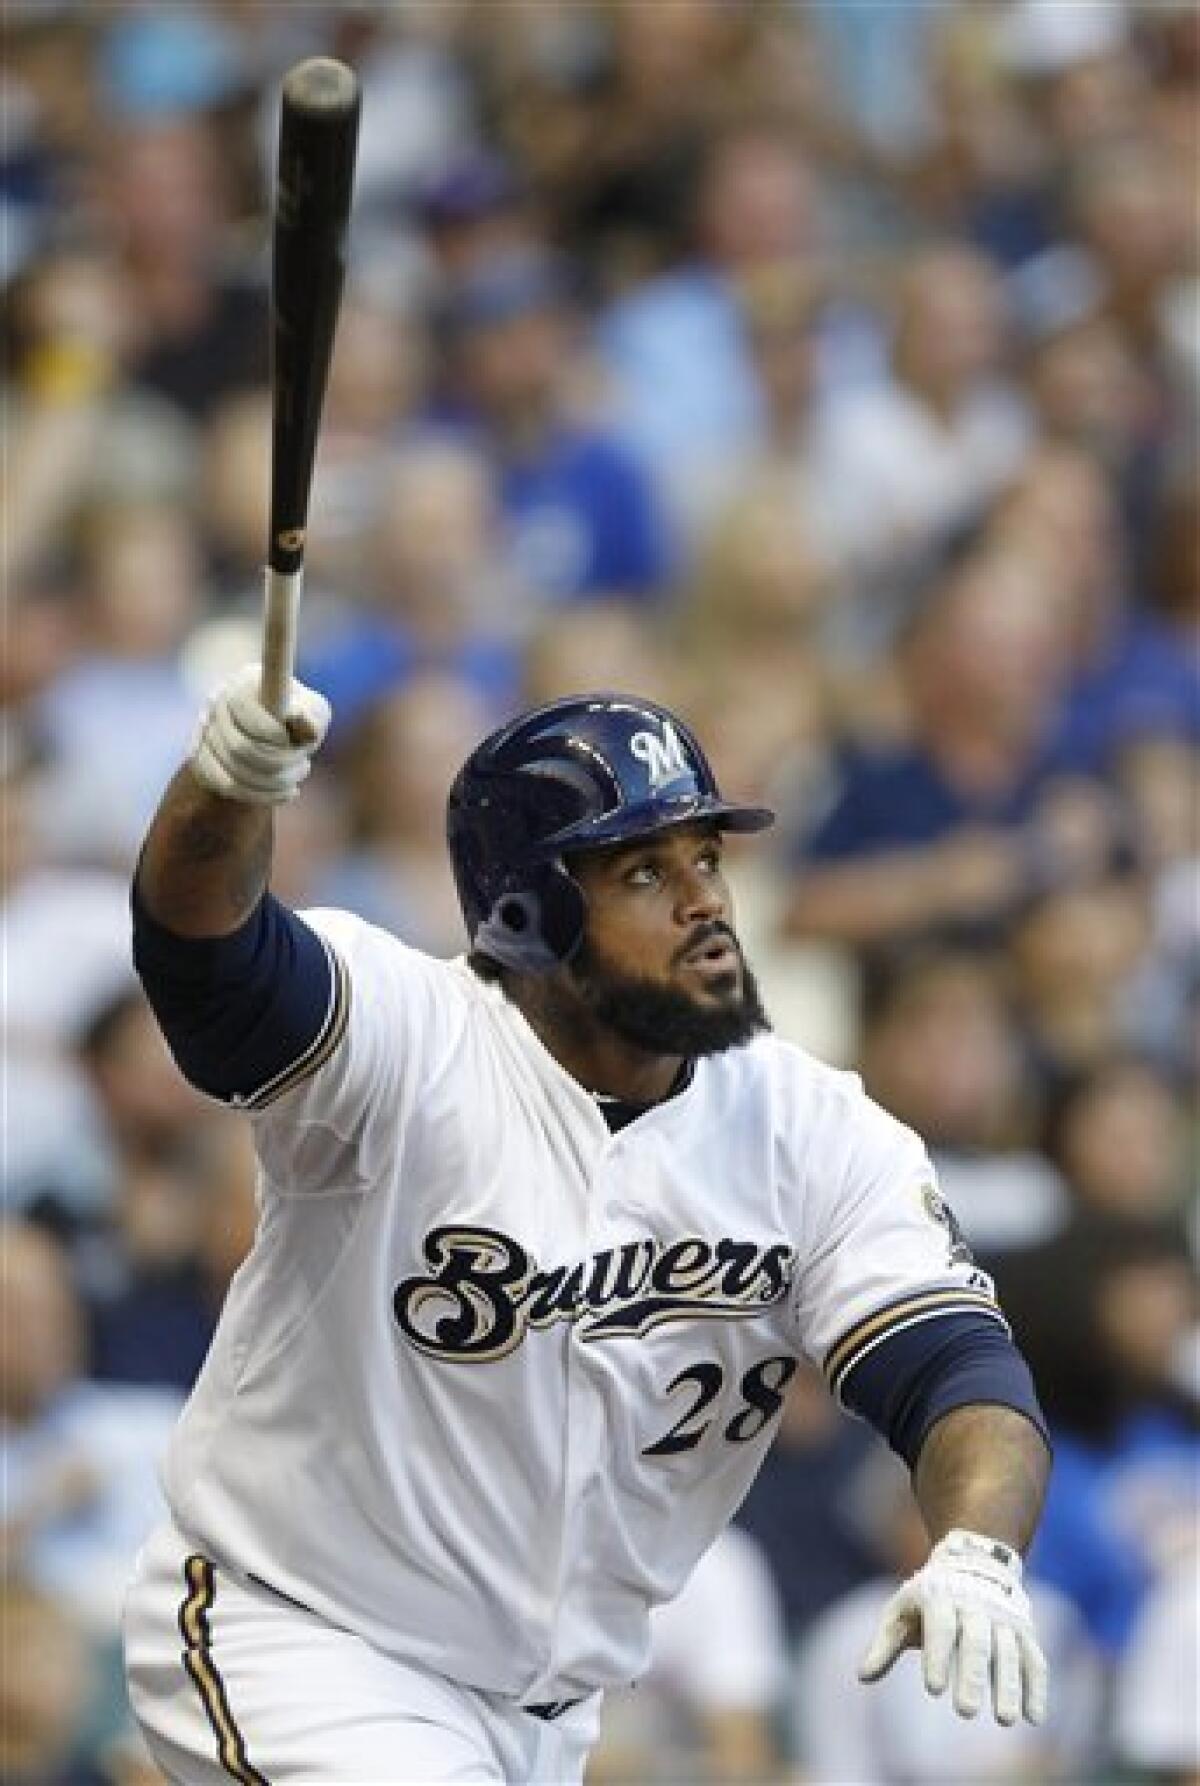 Can Ryan Braun and Prince Fielder Carry the Brewers to the World